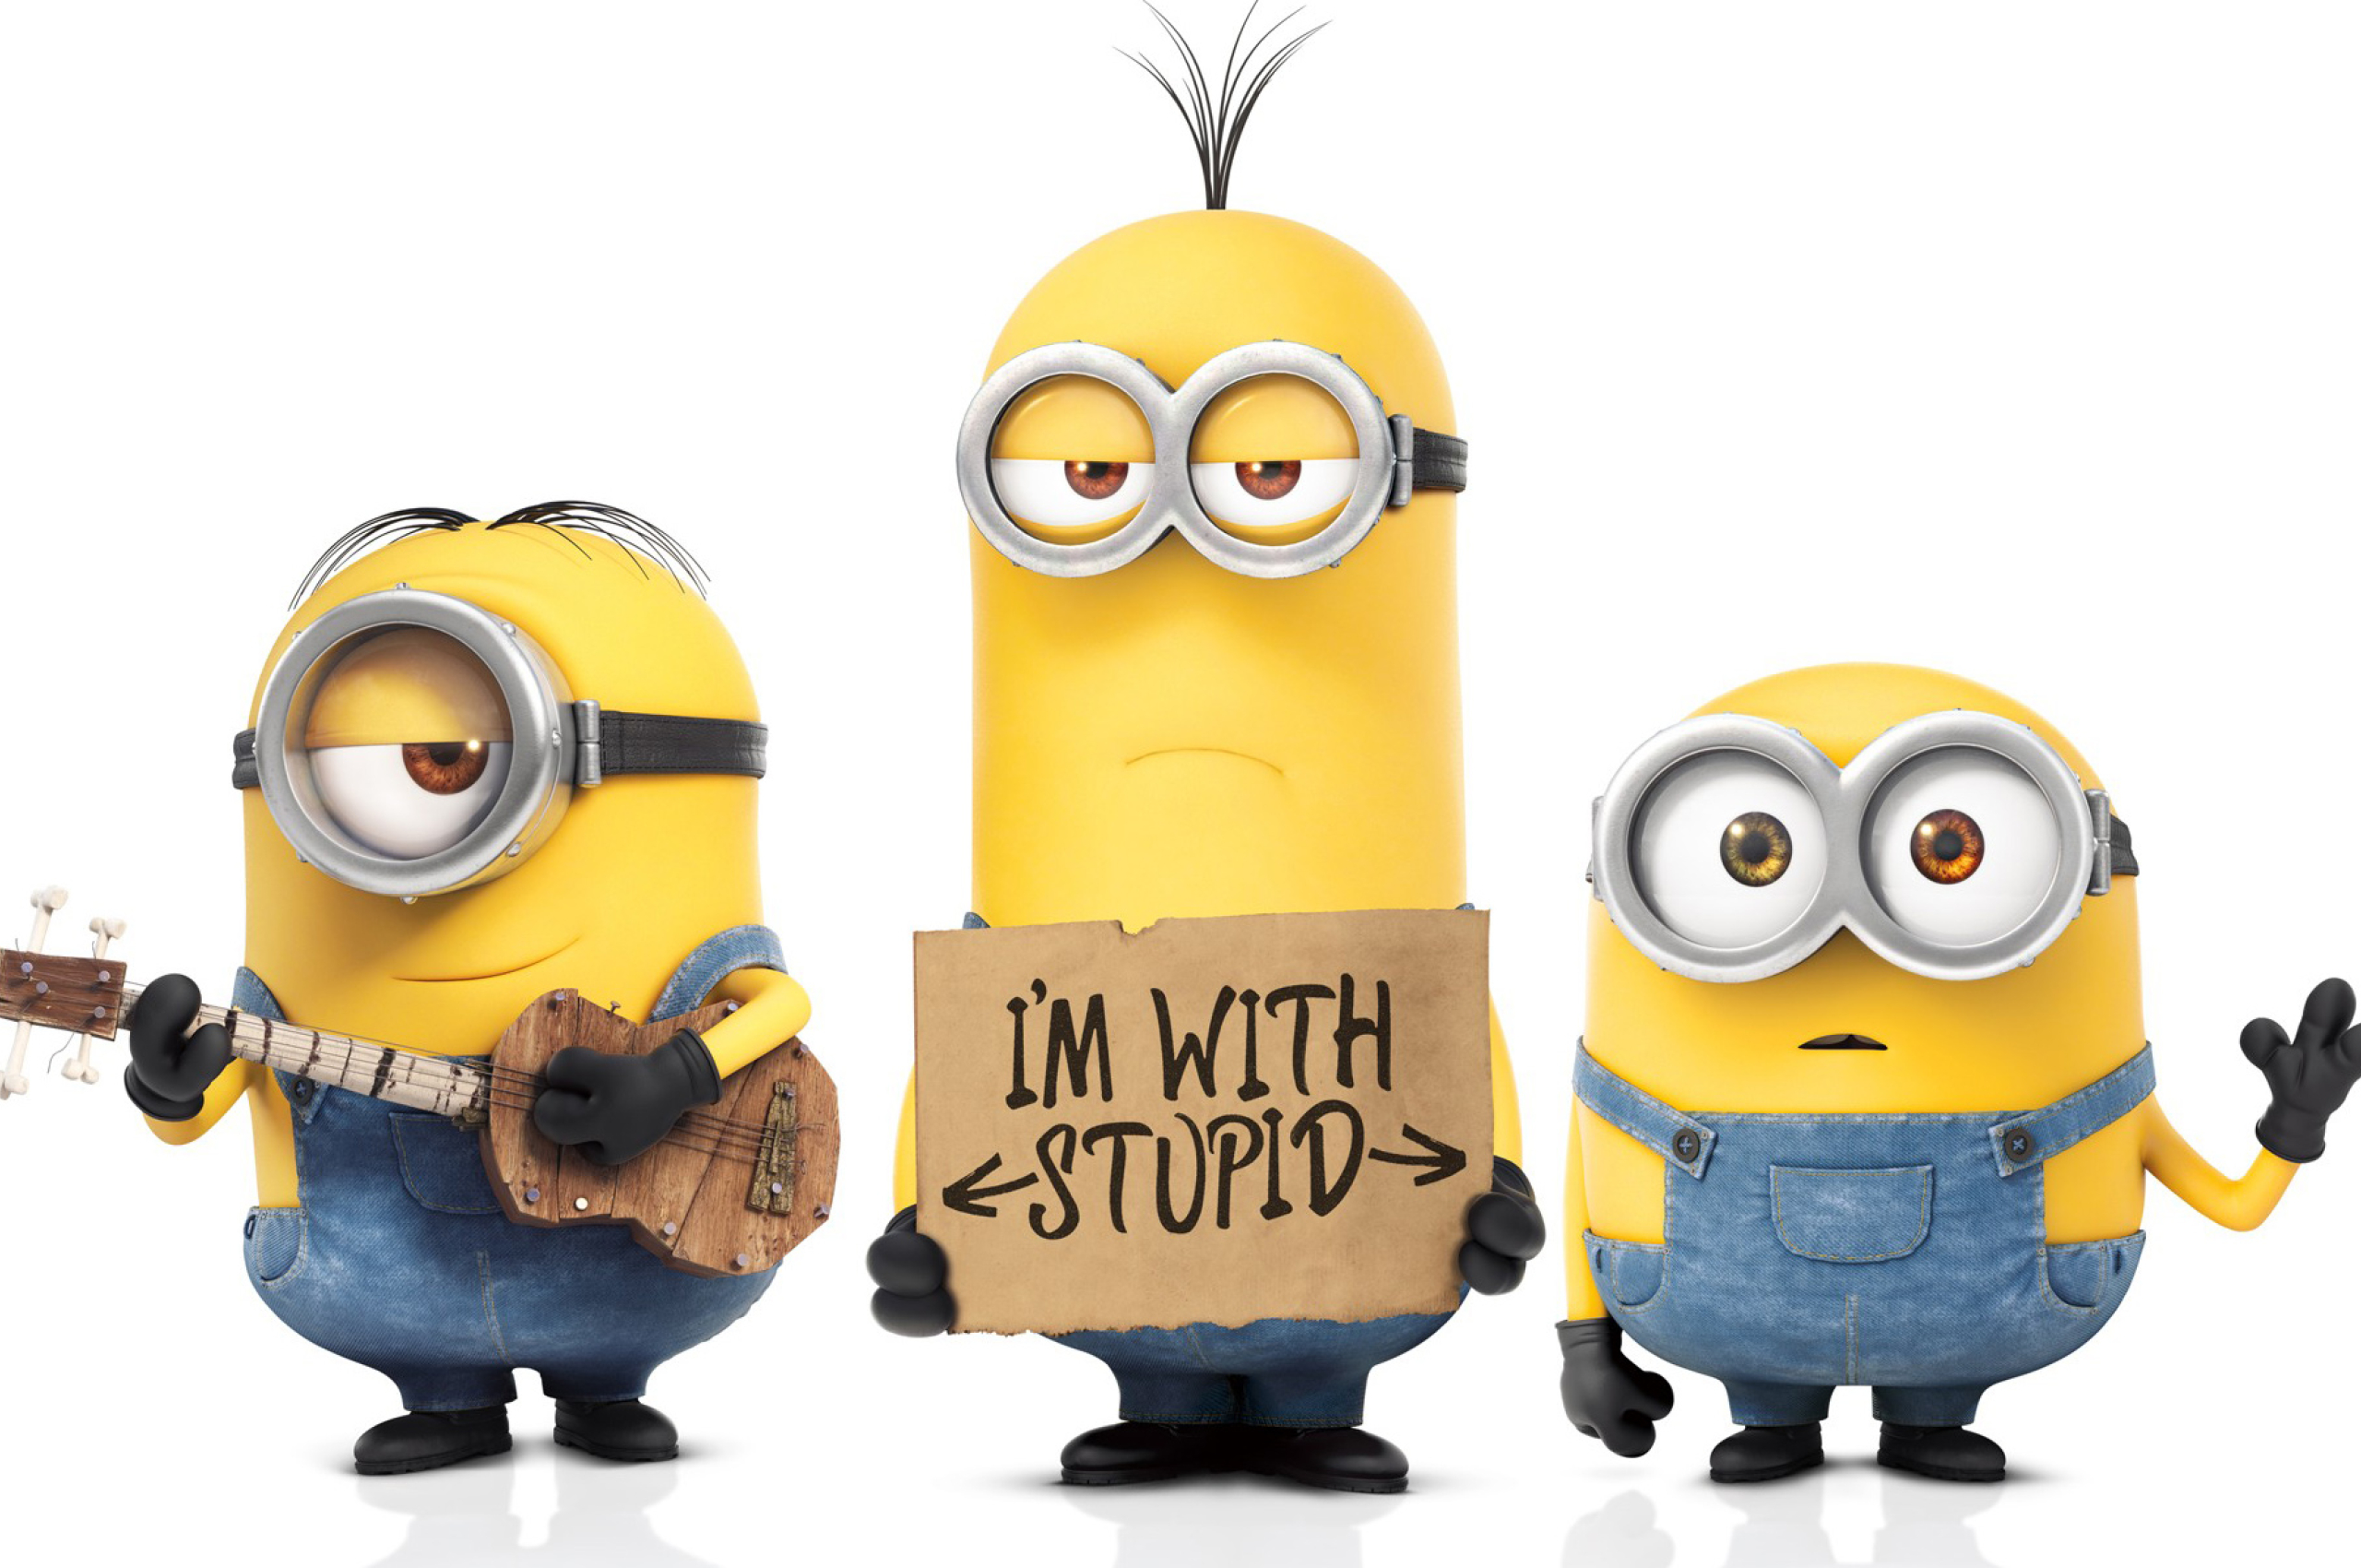 2560x1700 Minions 2015 Funny Wallpapers Chromebook Pixel Wallpaper Hd Movies 4k Wallpapers Images Photos And Background We have 89+ amazing background pictures carefully picked by our community. 2560x1700 minions 2015 funny wallpapers